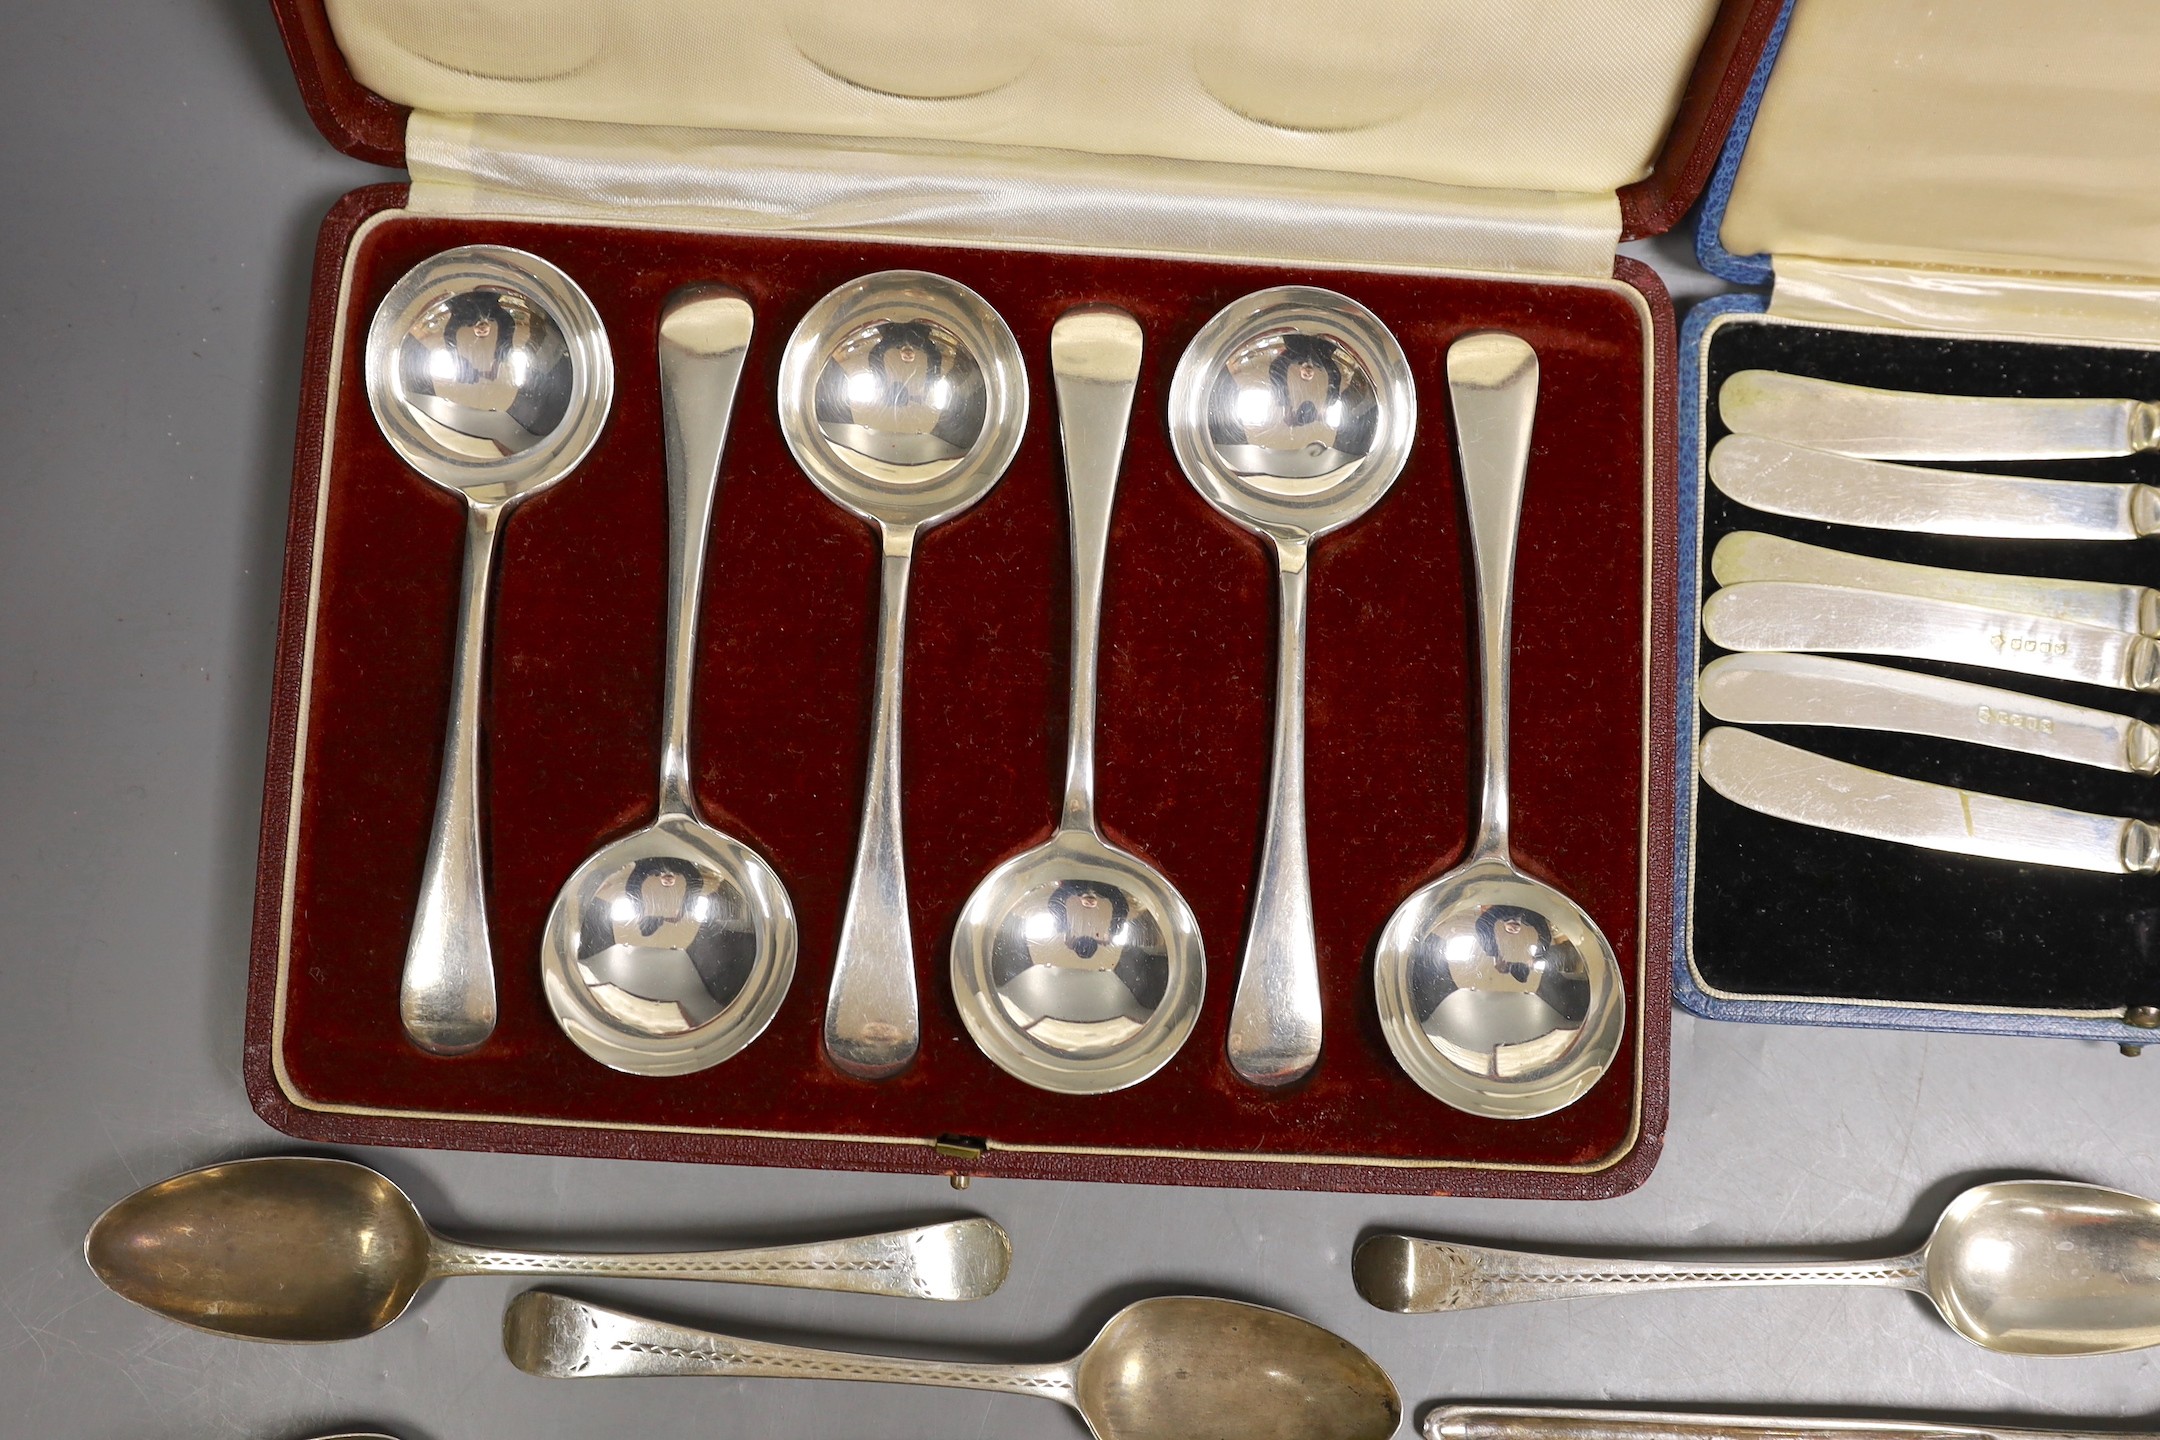 A cased set of George V silver Old English pattern soup spoons, Harrod's Ltd, Sheffield, 1934 and a cased set of six silver handled tea knives and sundry silver and white metal flatware.